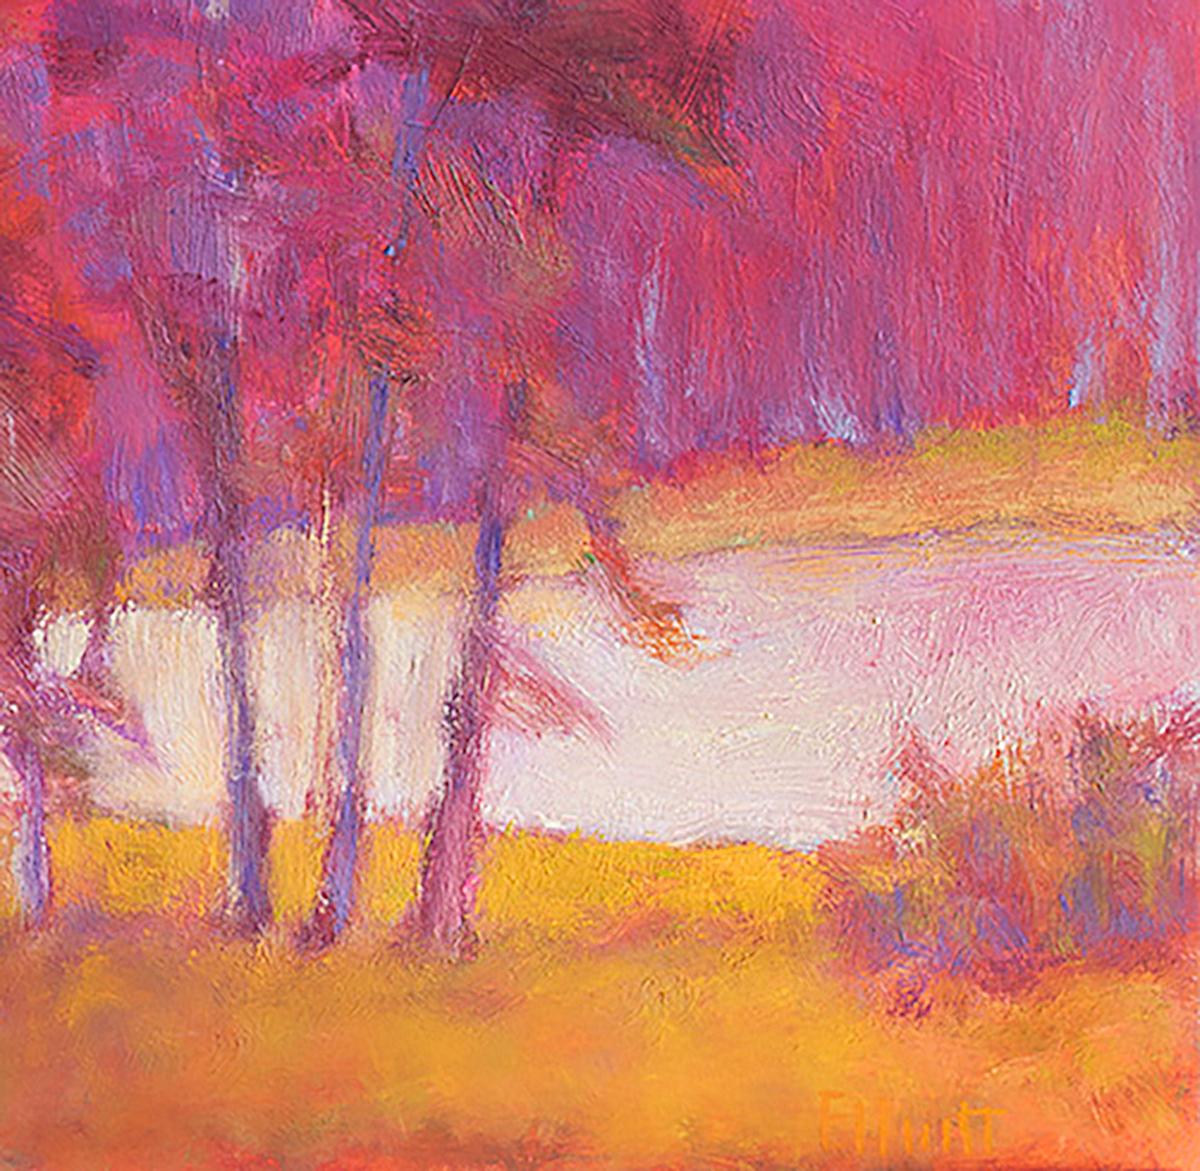 This abstracted, impressionistic landscape painting by Ken Elliott is made with oil paint on wood panel. The piece features a warm palette, with red trees in front of a purple and pink forest and yellow ochre ground. The paint is layered to create